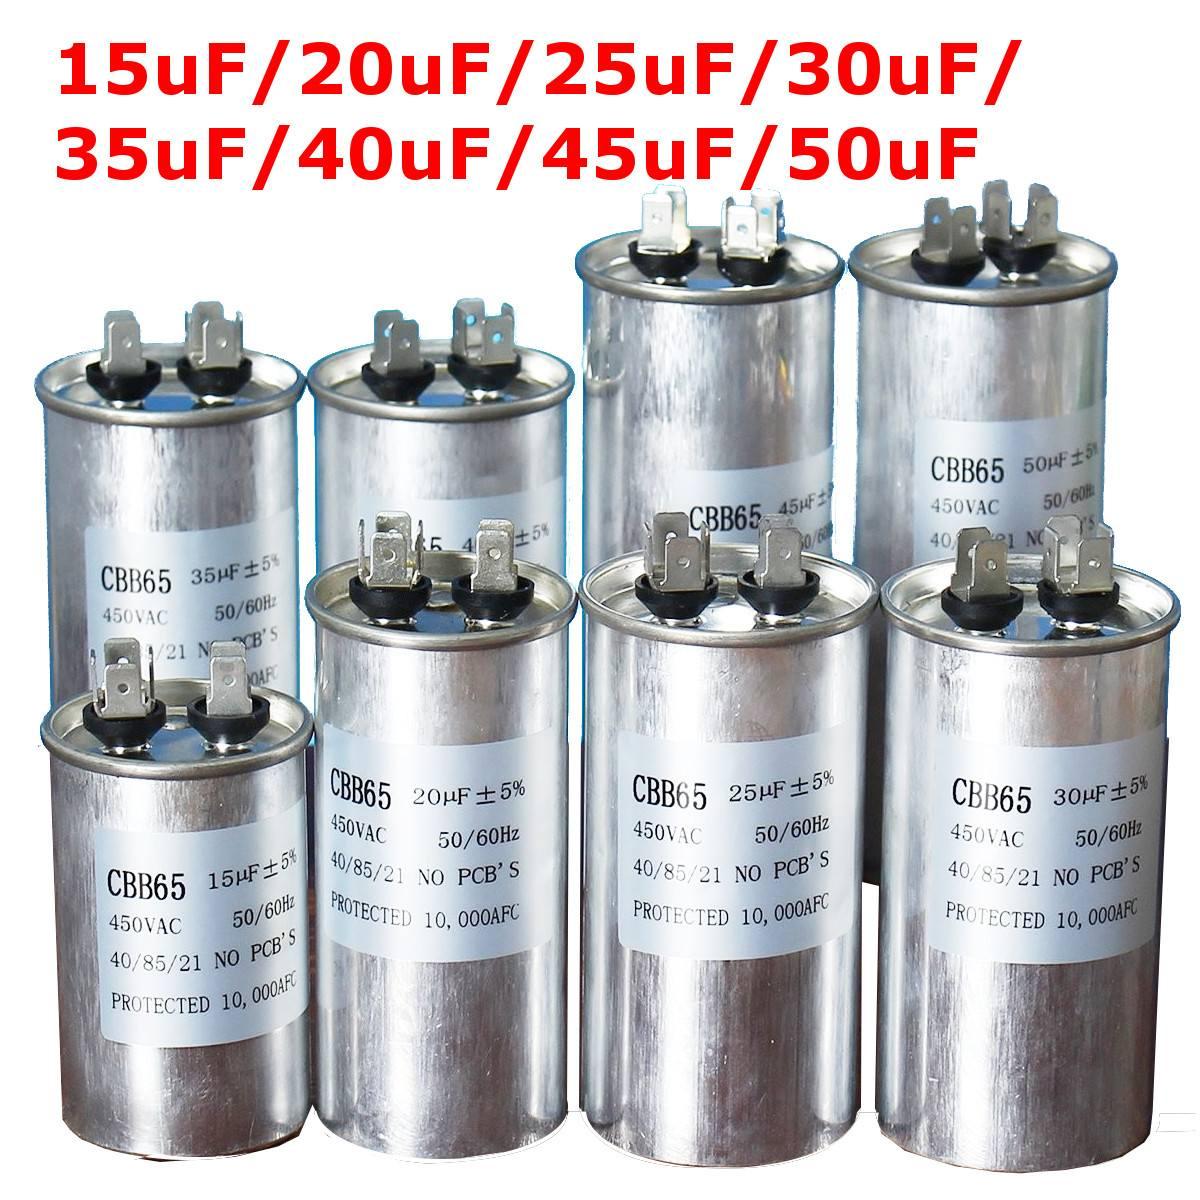 AirCon Capacitor from 1UF to 60UF